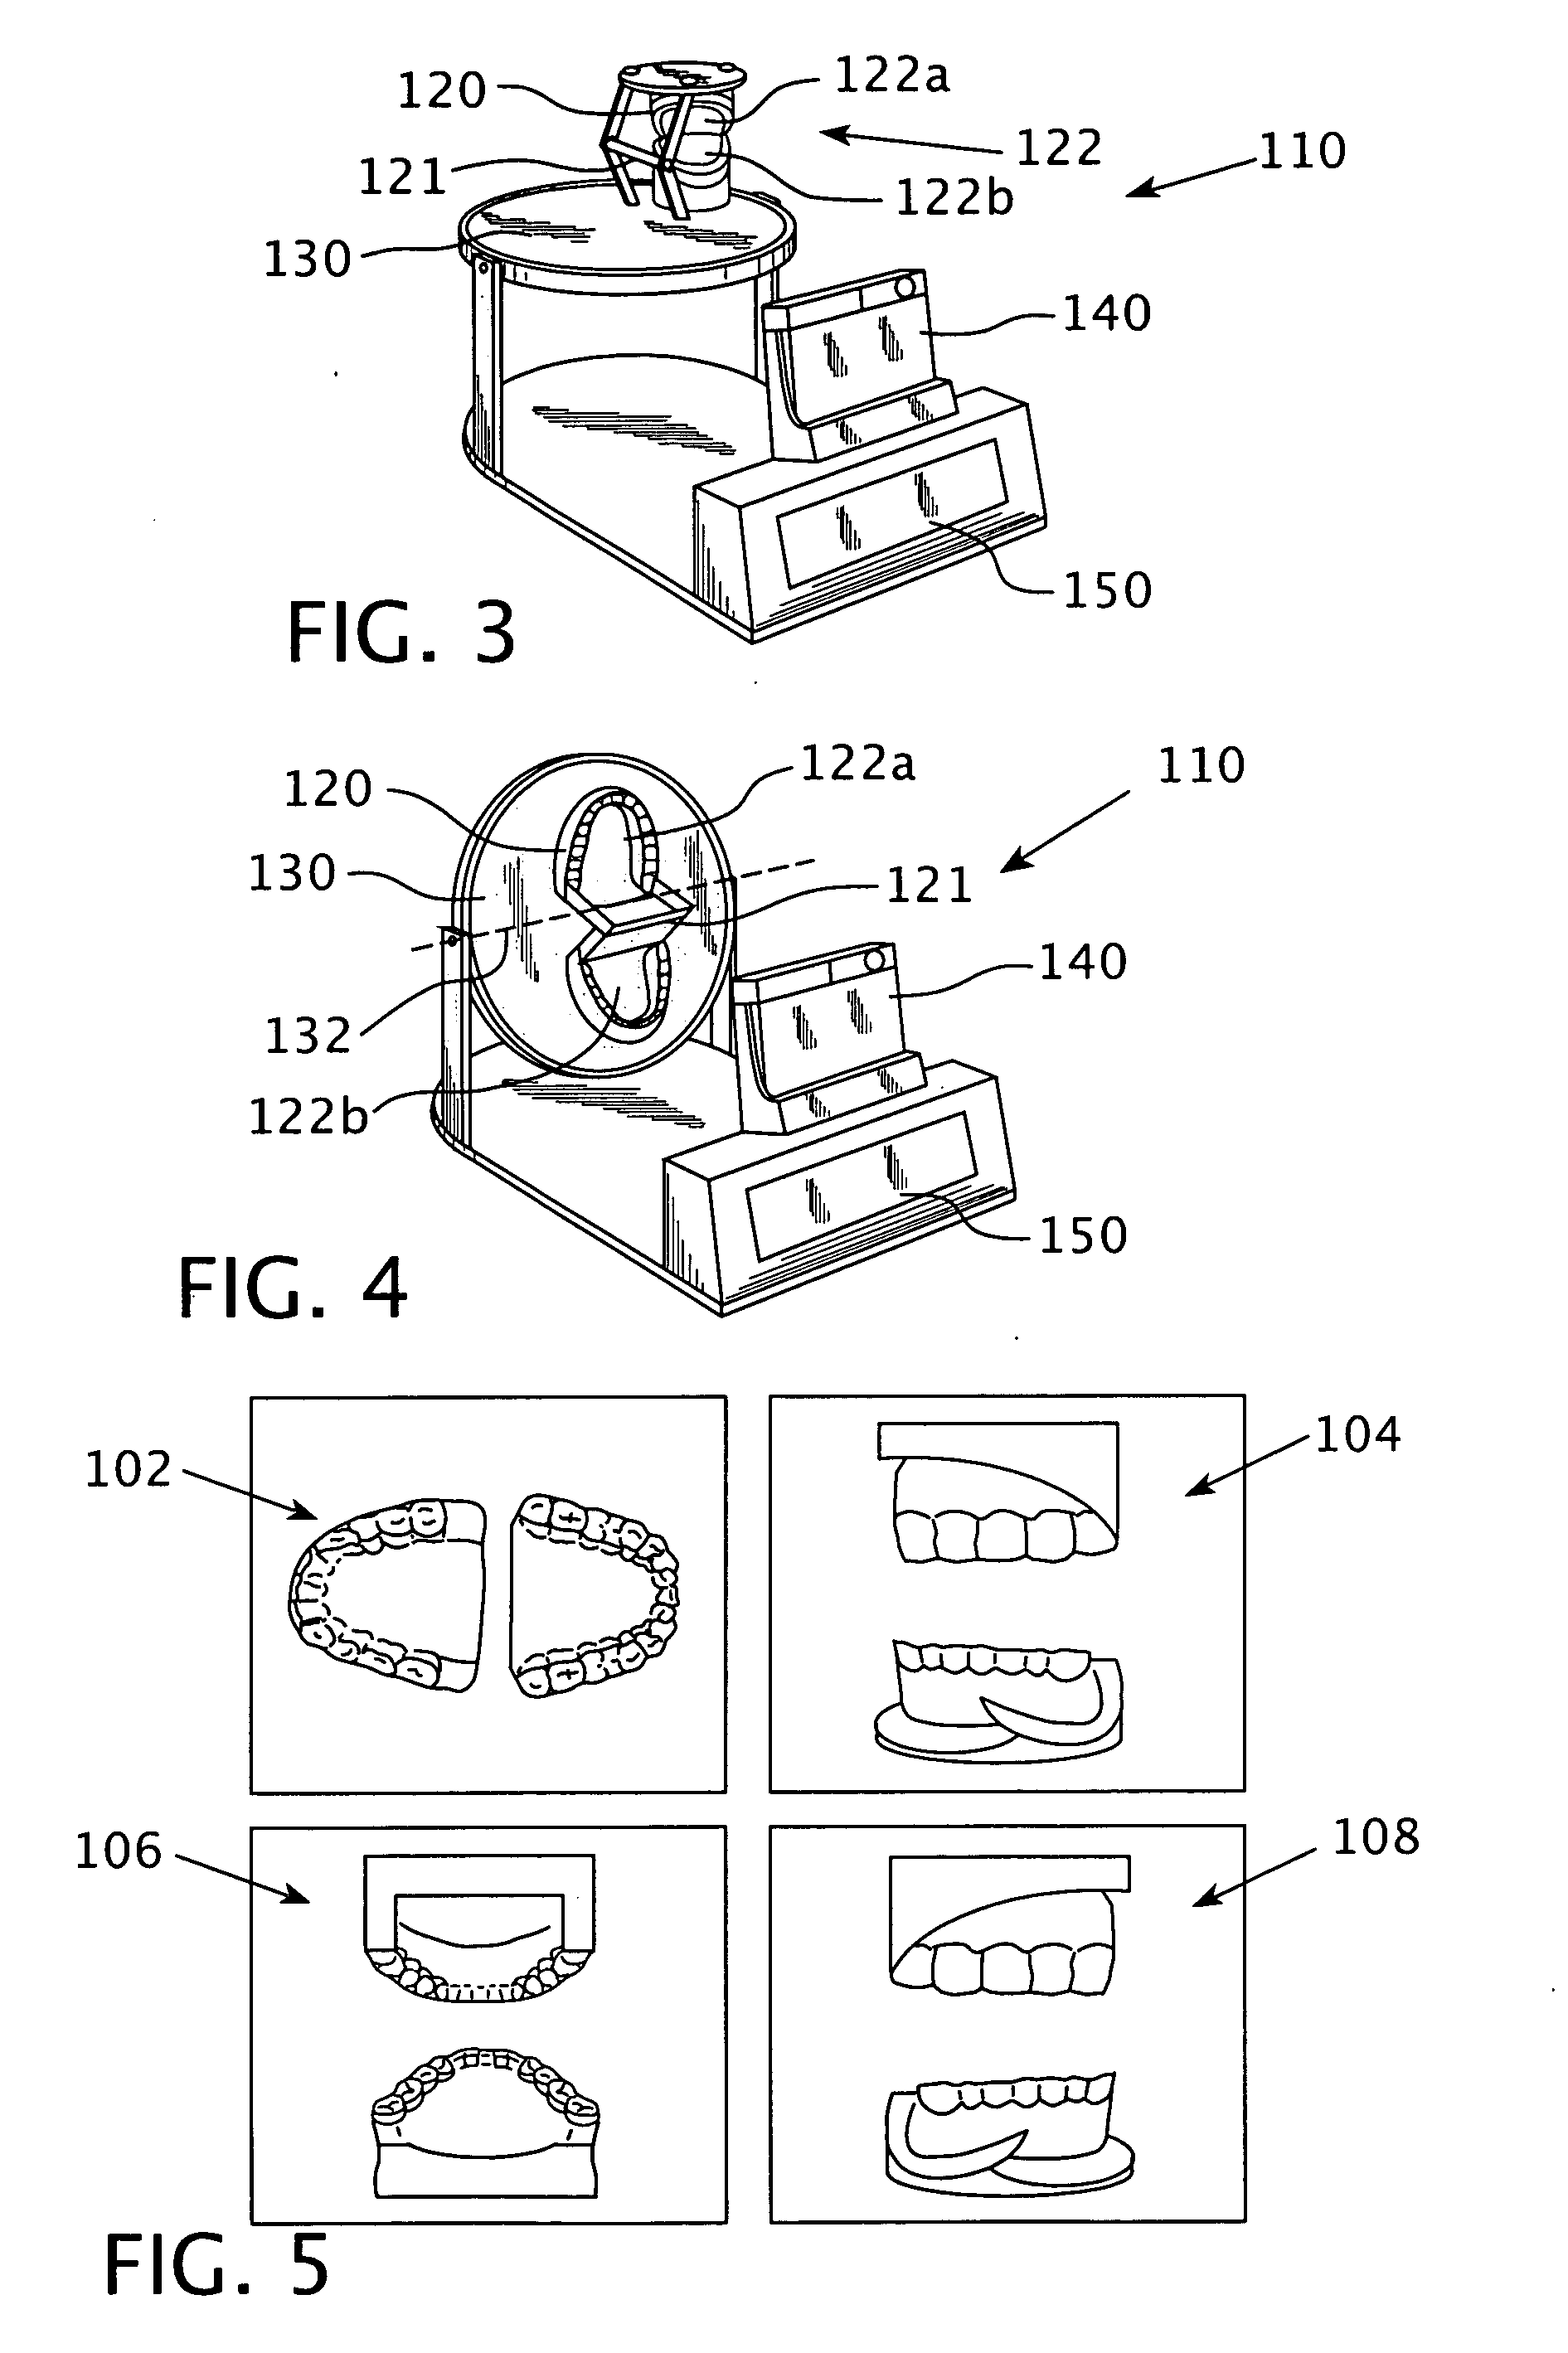 Apparatus and method for manufacturing a mandibular advancement device